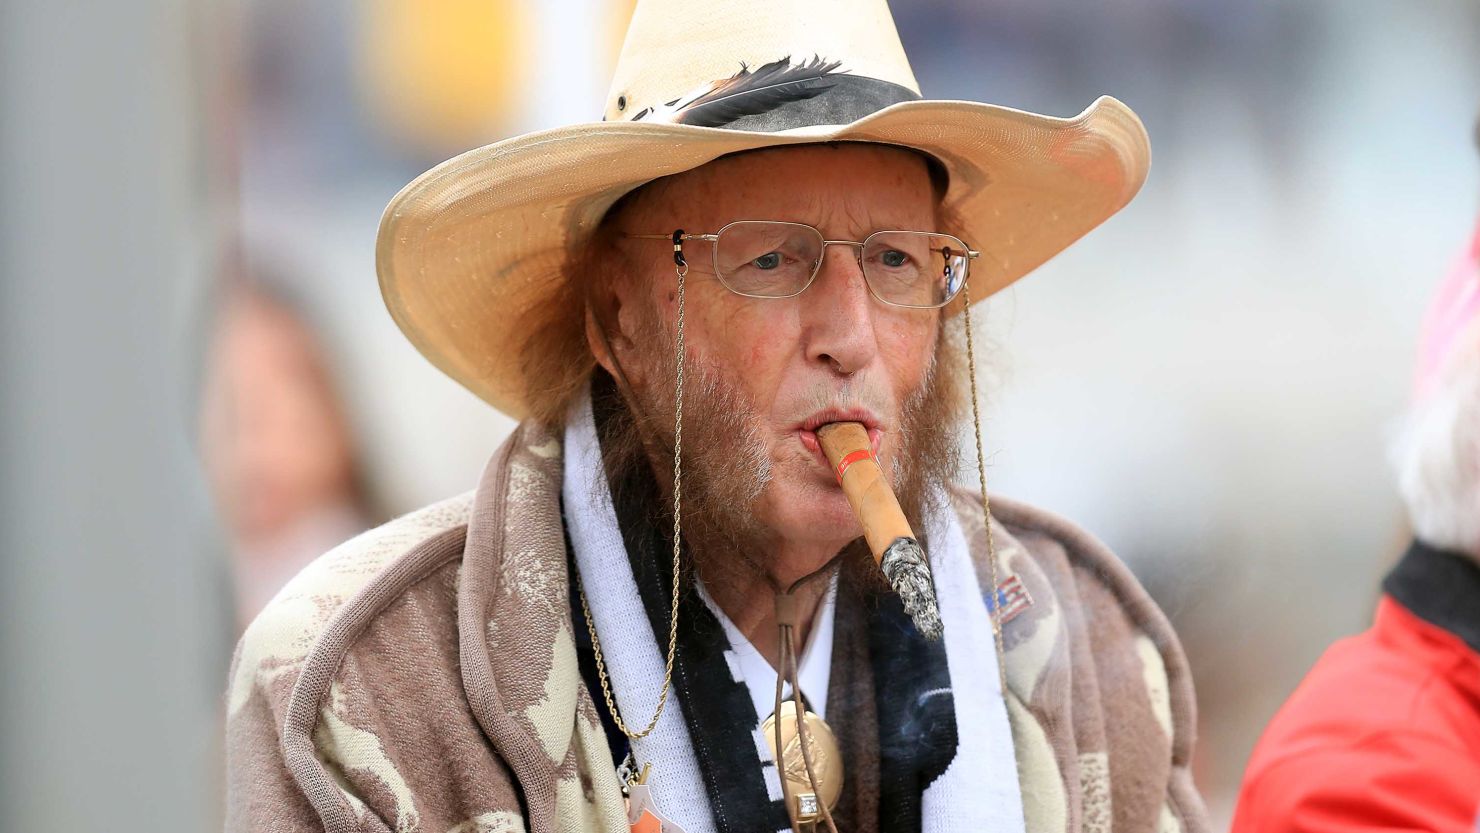 Horse racing broadcaster John McCririck has died at the age of 79.